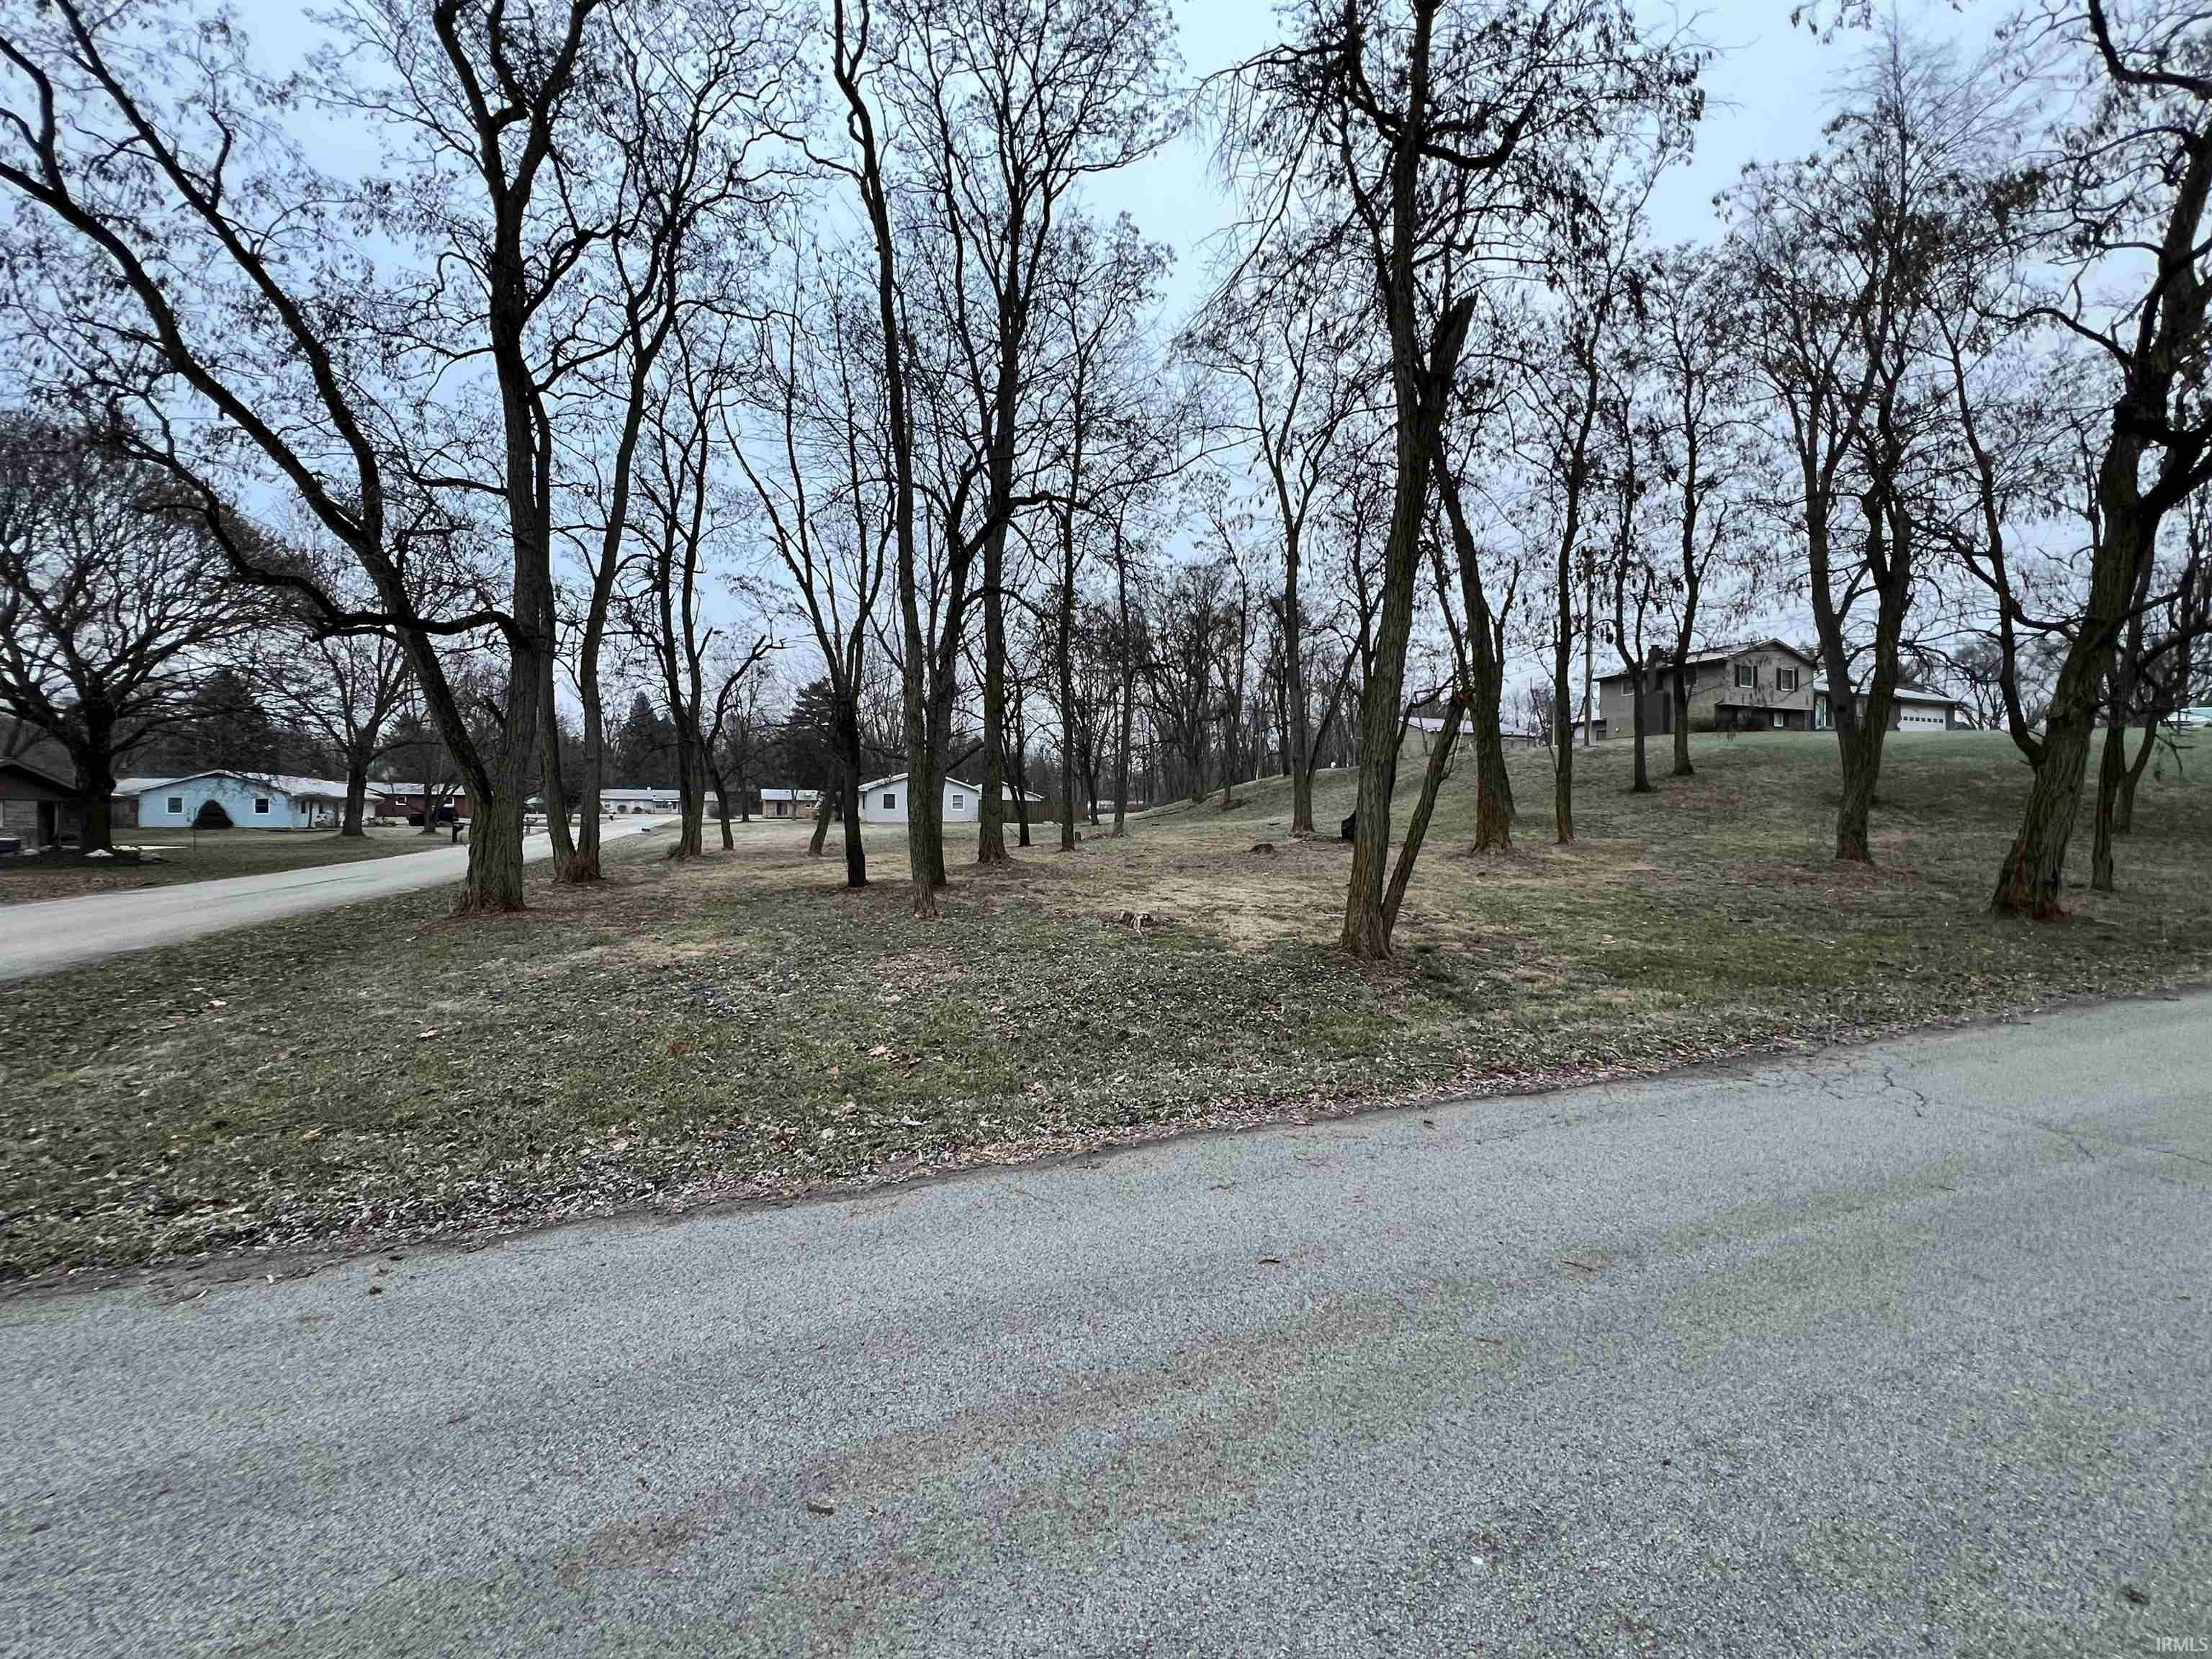 2. Tbd Lot 122 Sycamore Dr